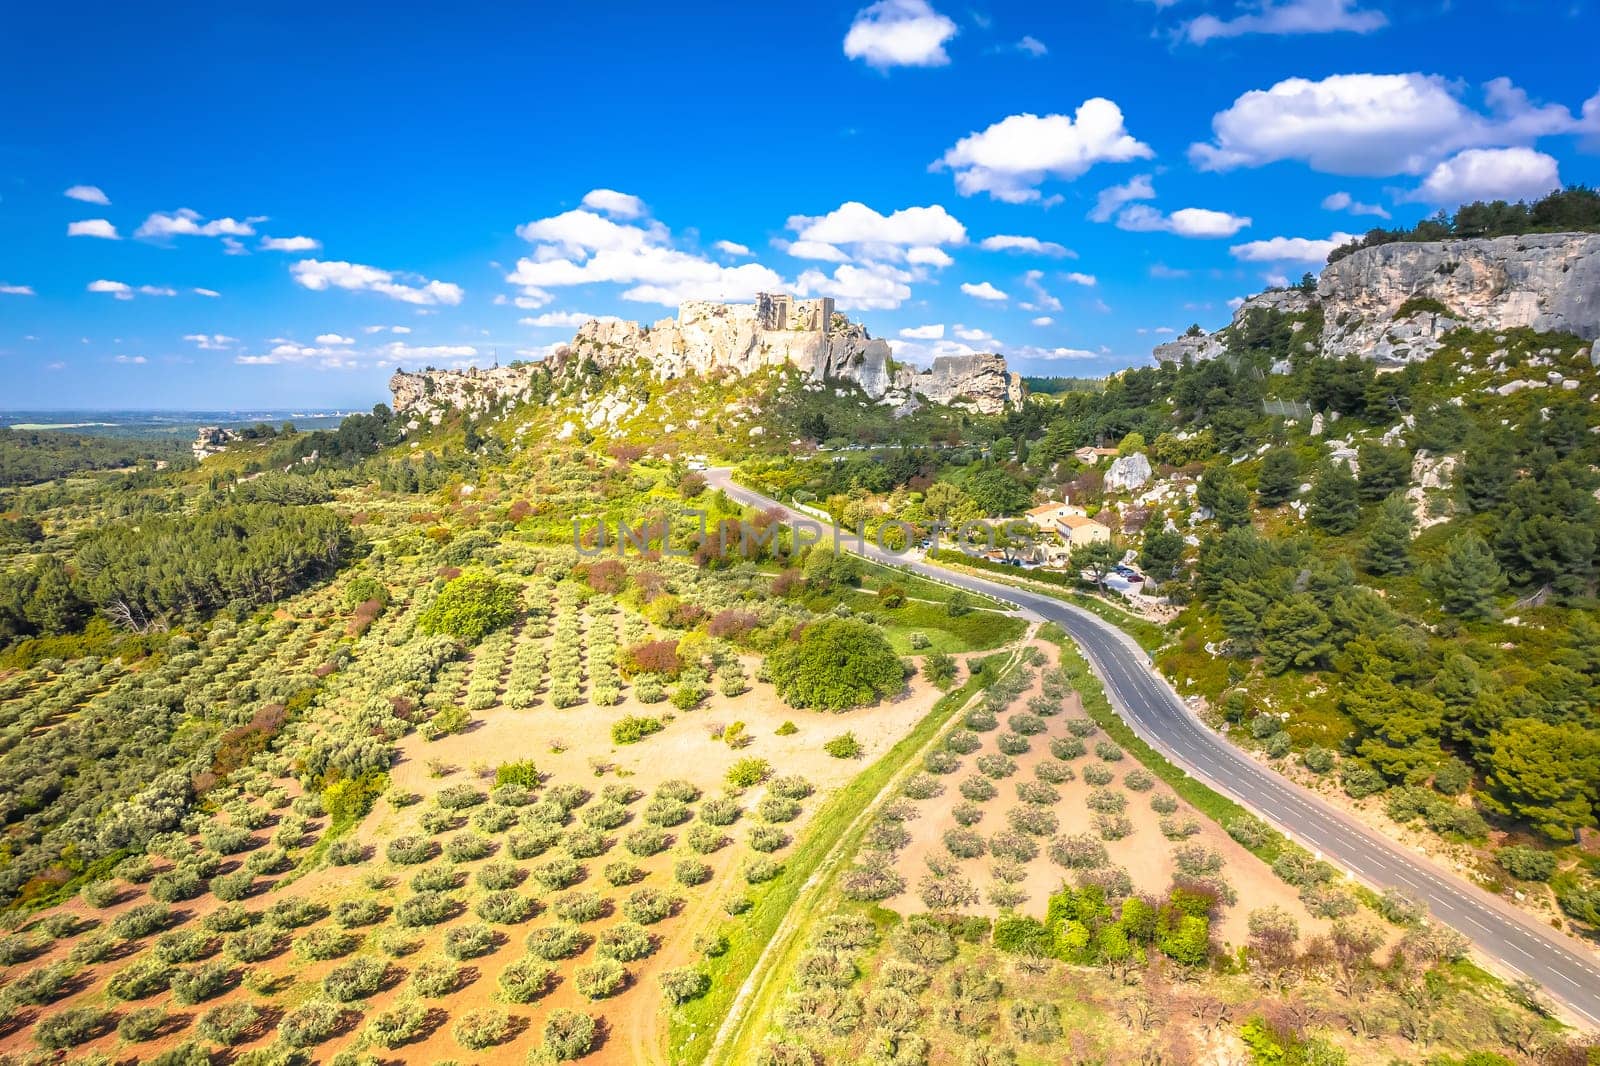 Les Baux de Provence scenic town on the rock aerial view by xbrchx